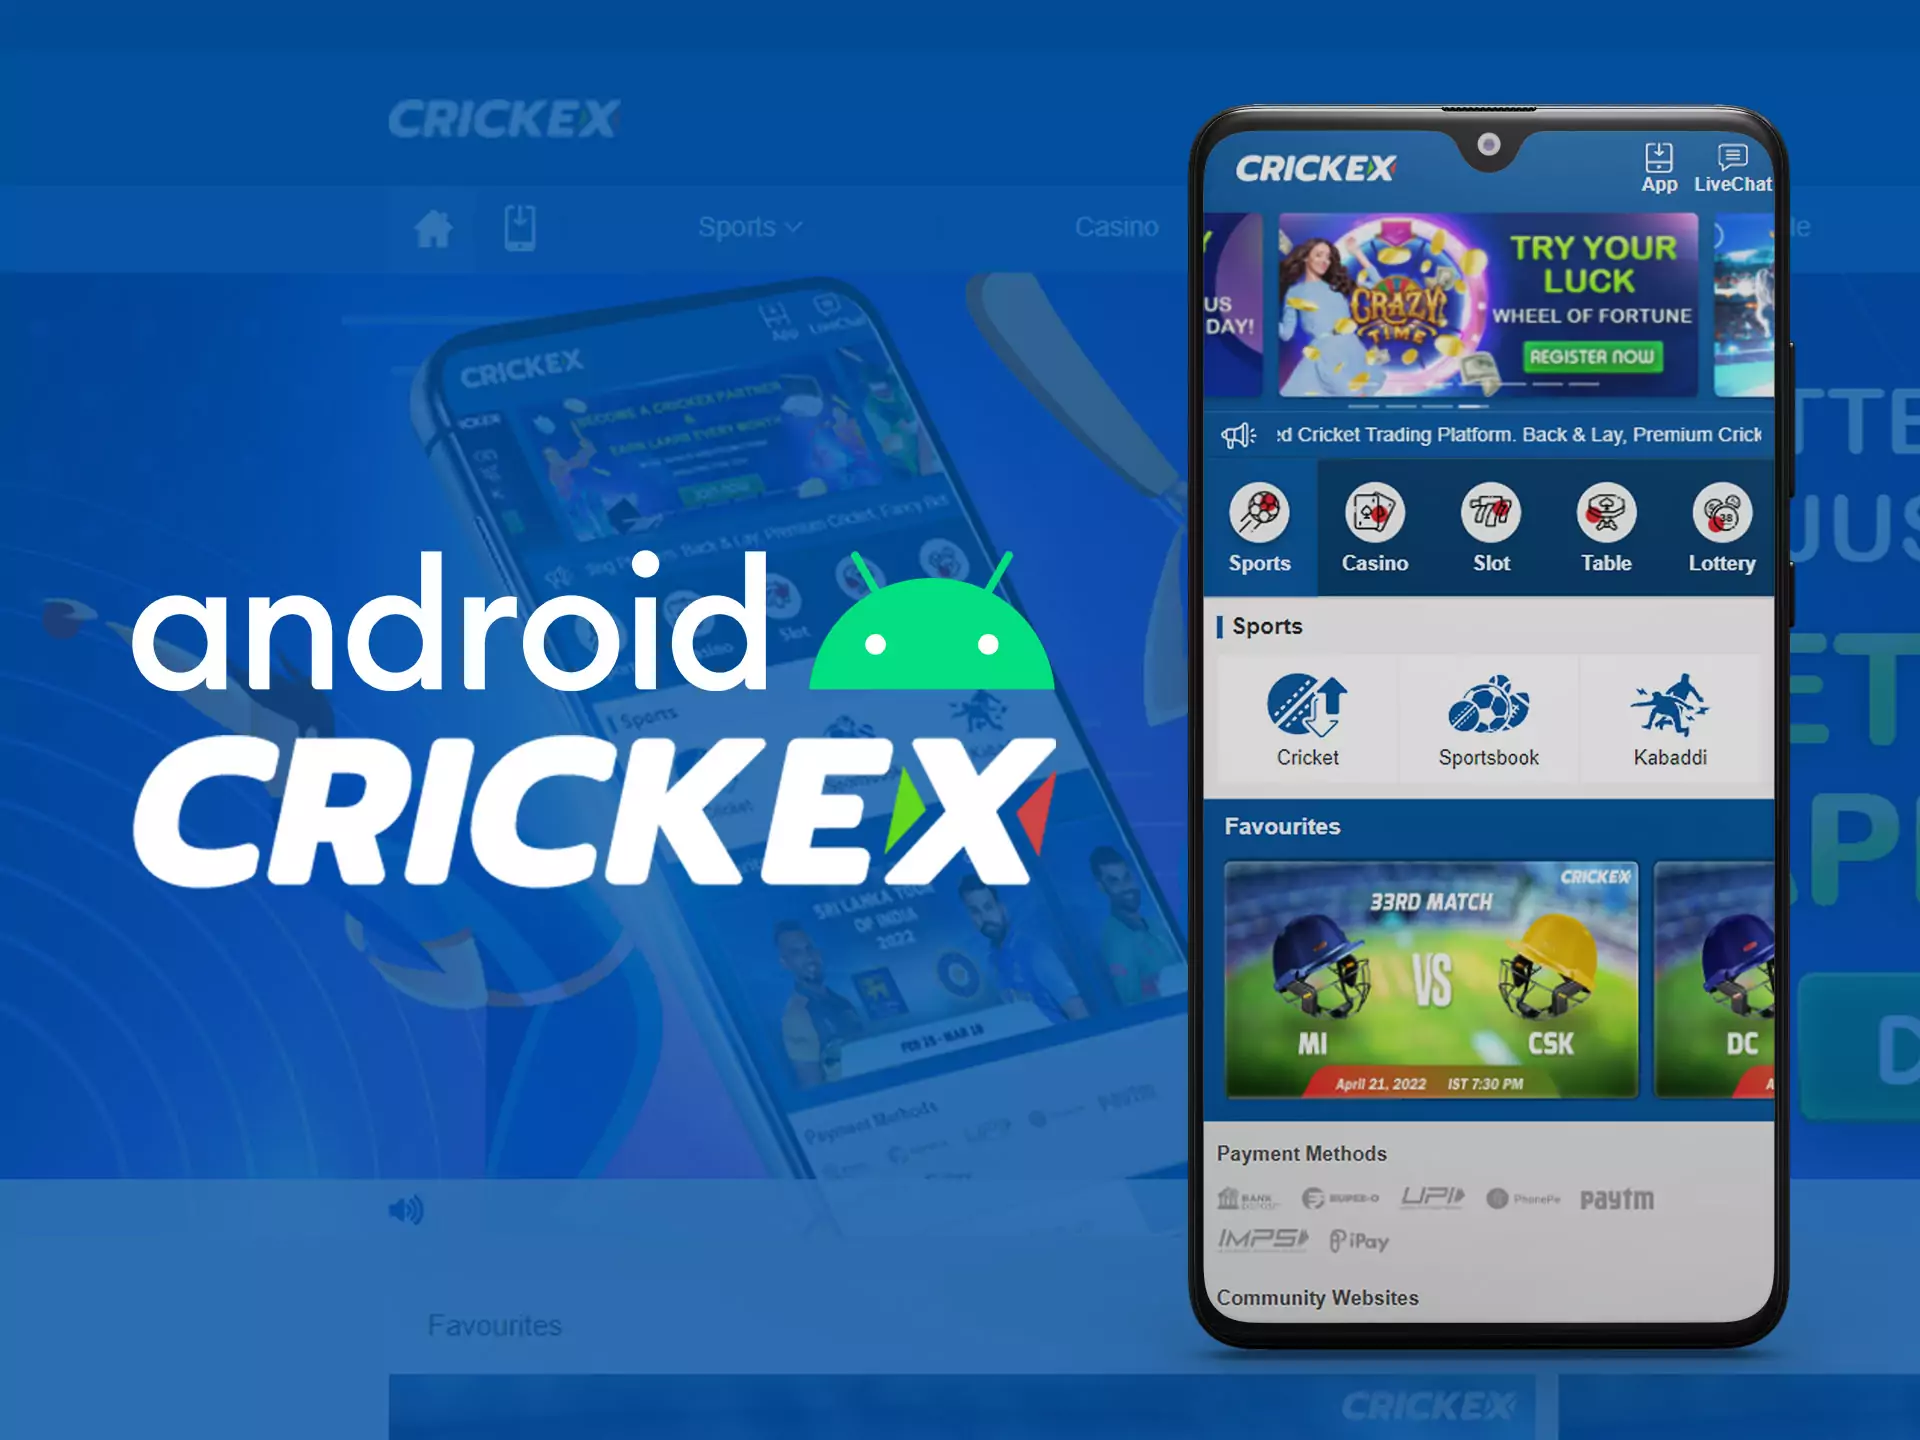 The Crickex app for Android can be downloaded from the official website.